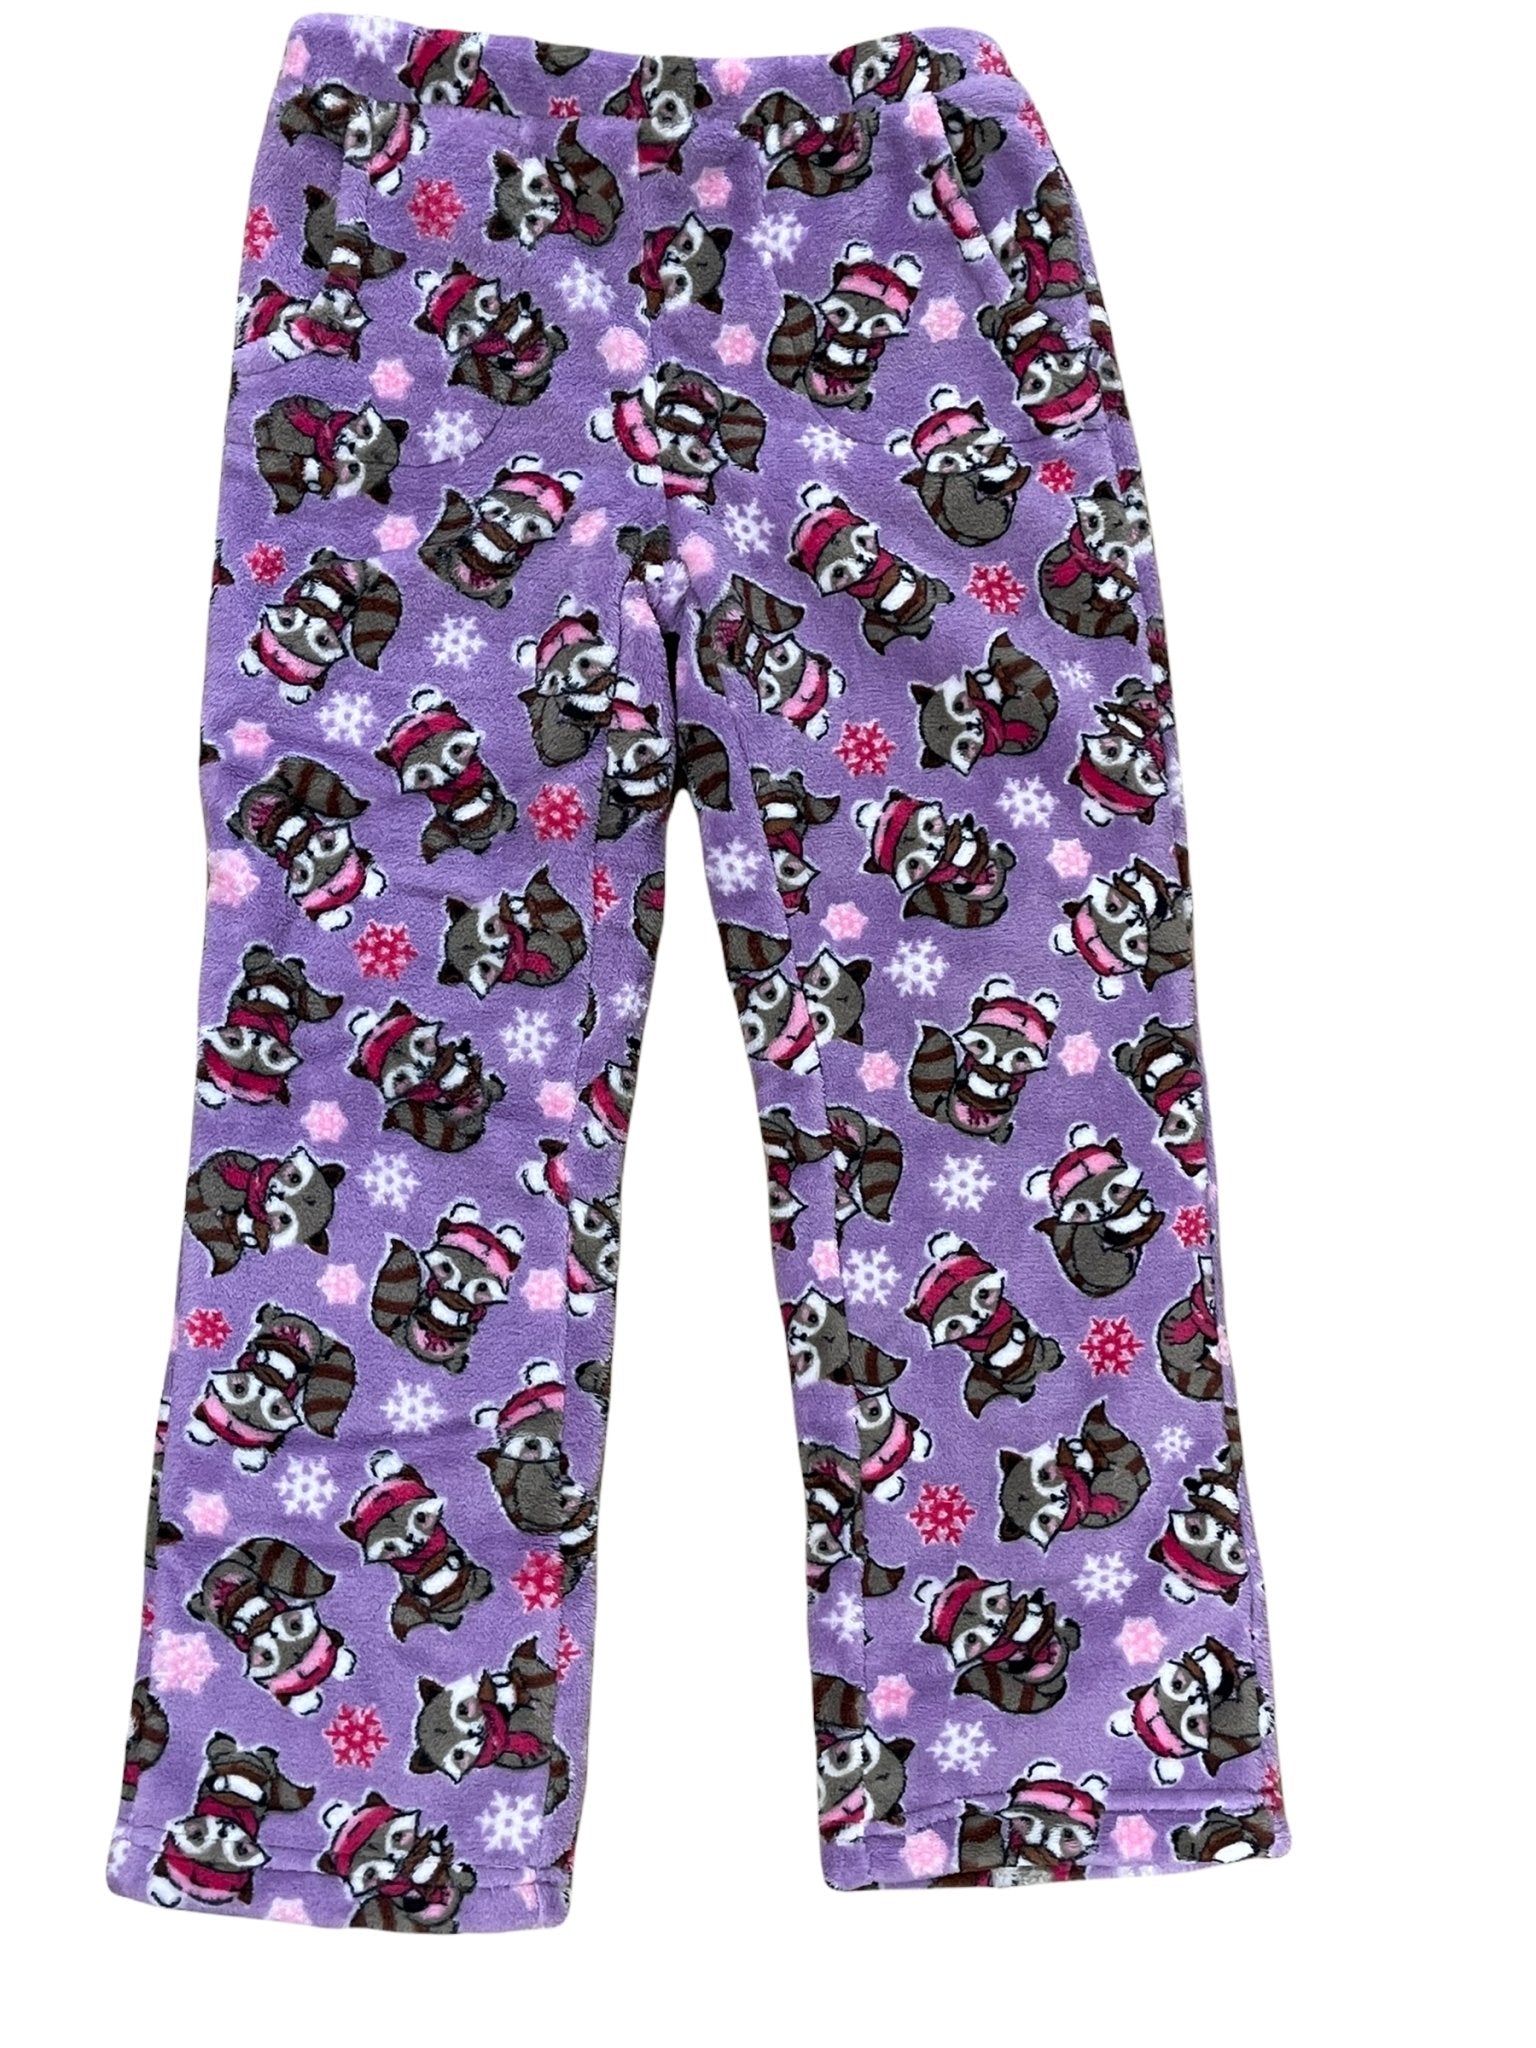 Candy Pink Fleece Pajama Bottoms in Popcorn and a Movie Pattern